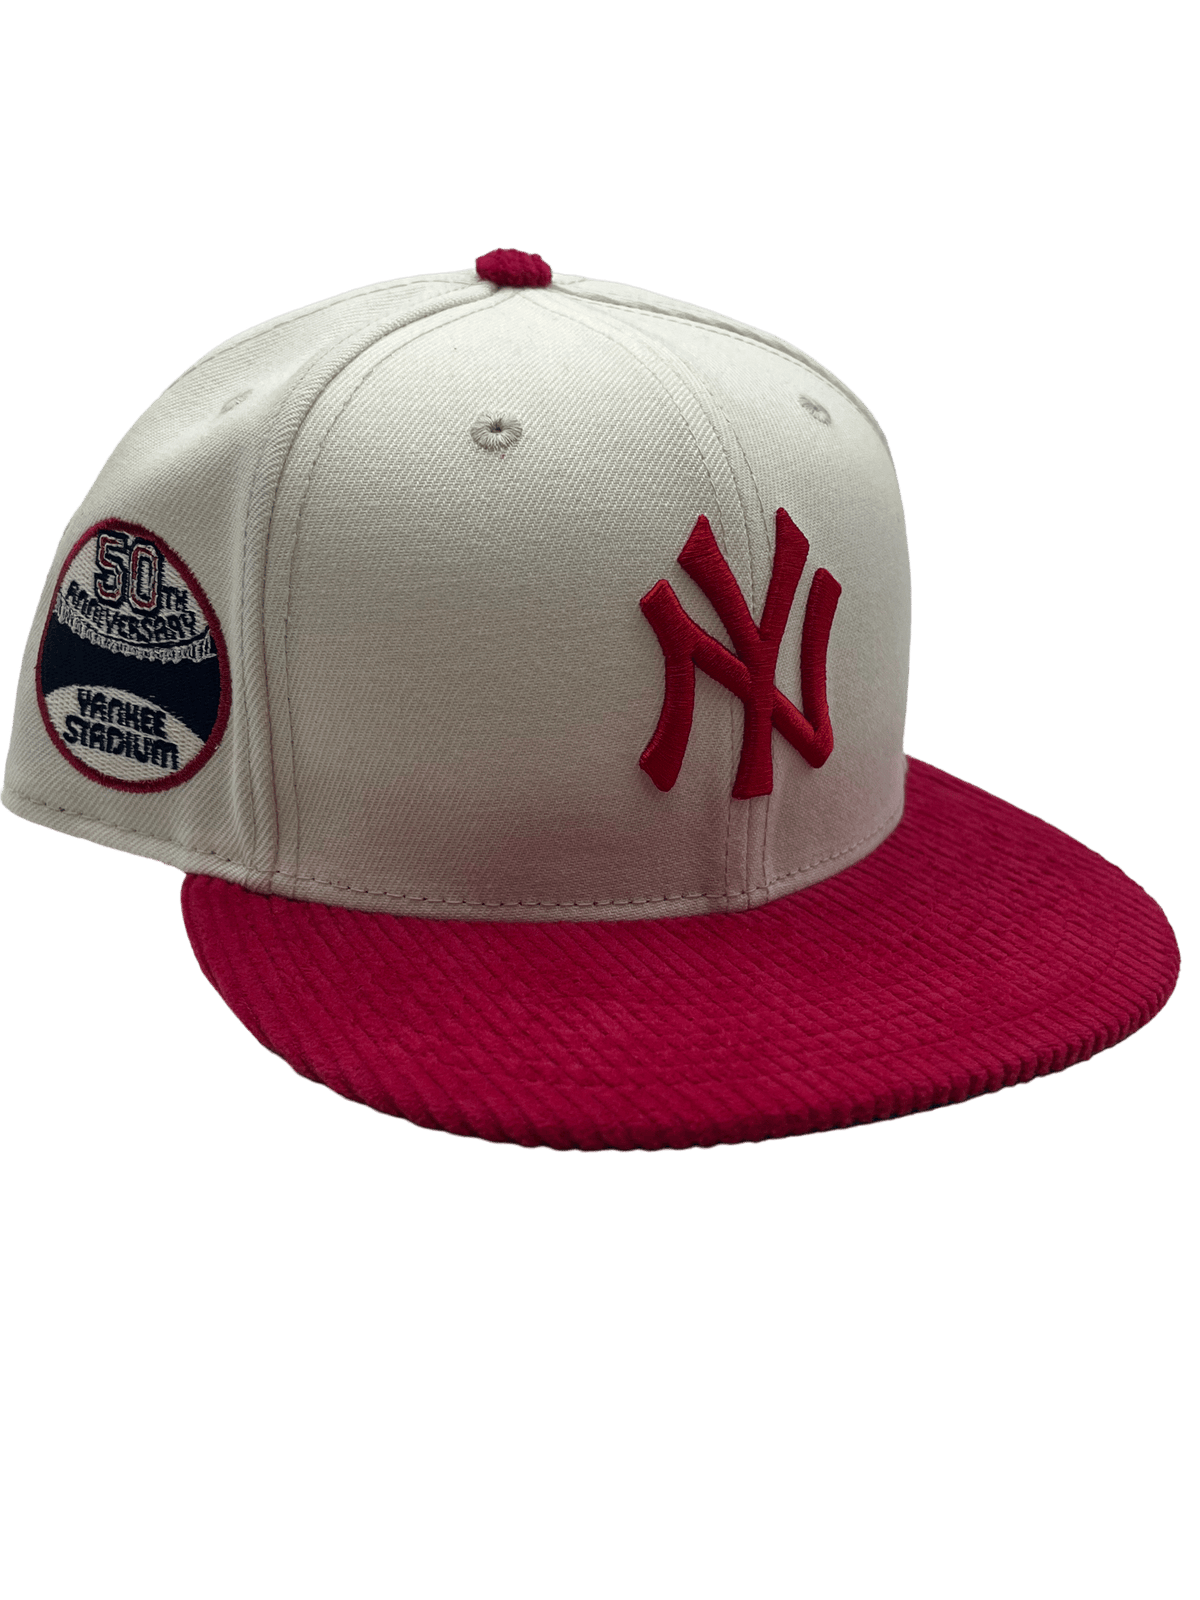 NJ Fitted Yanks Hat